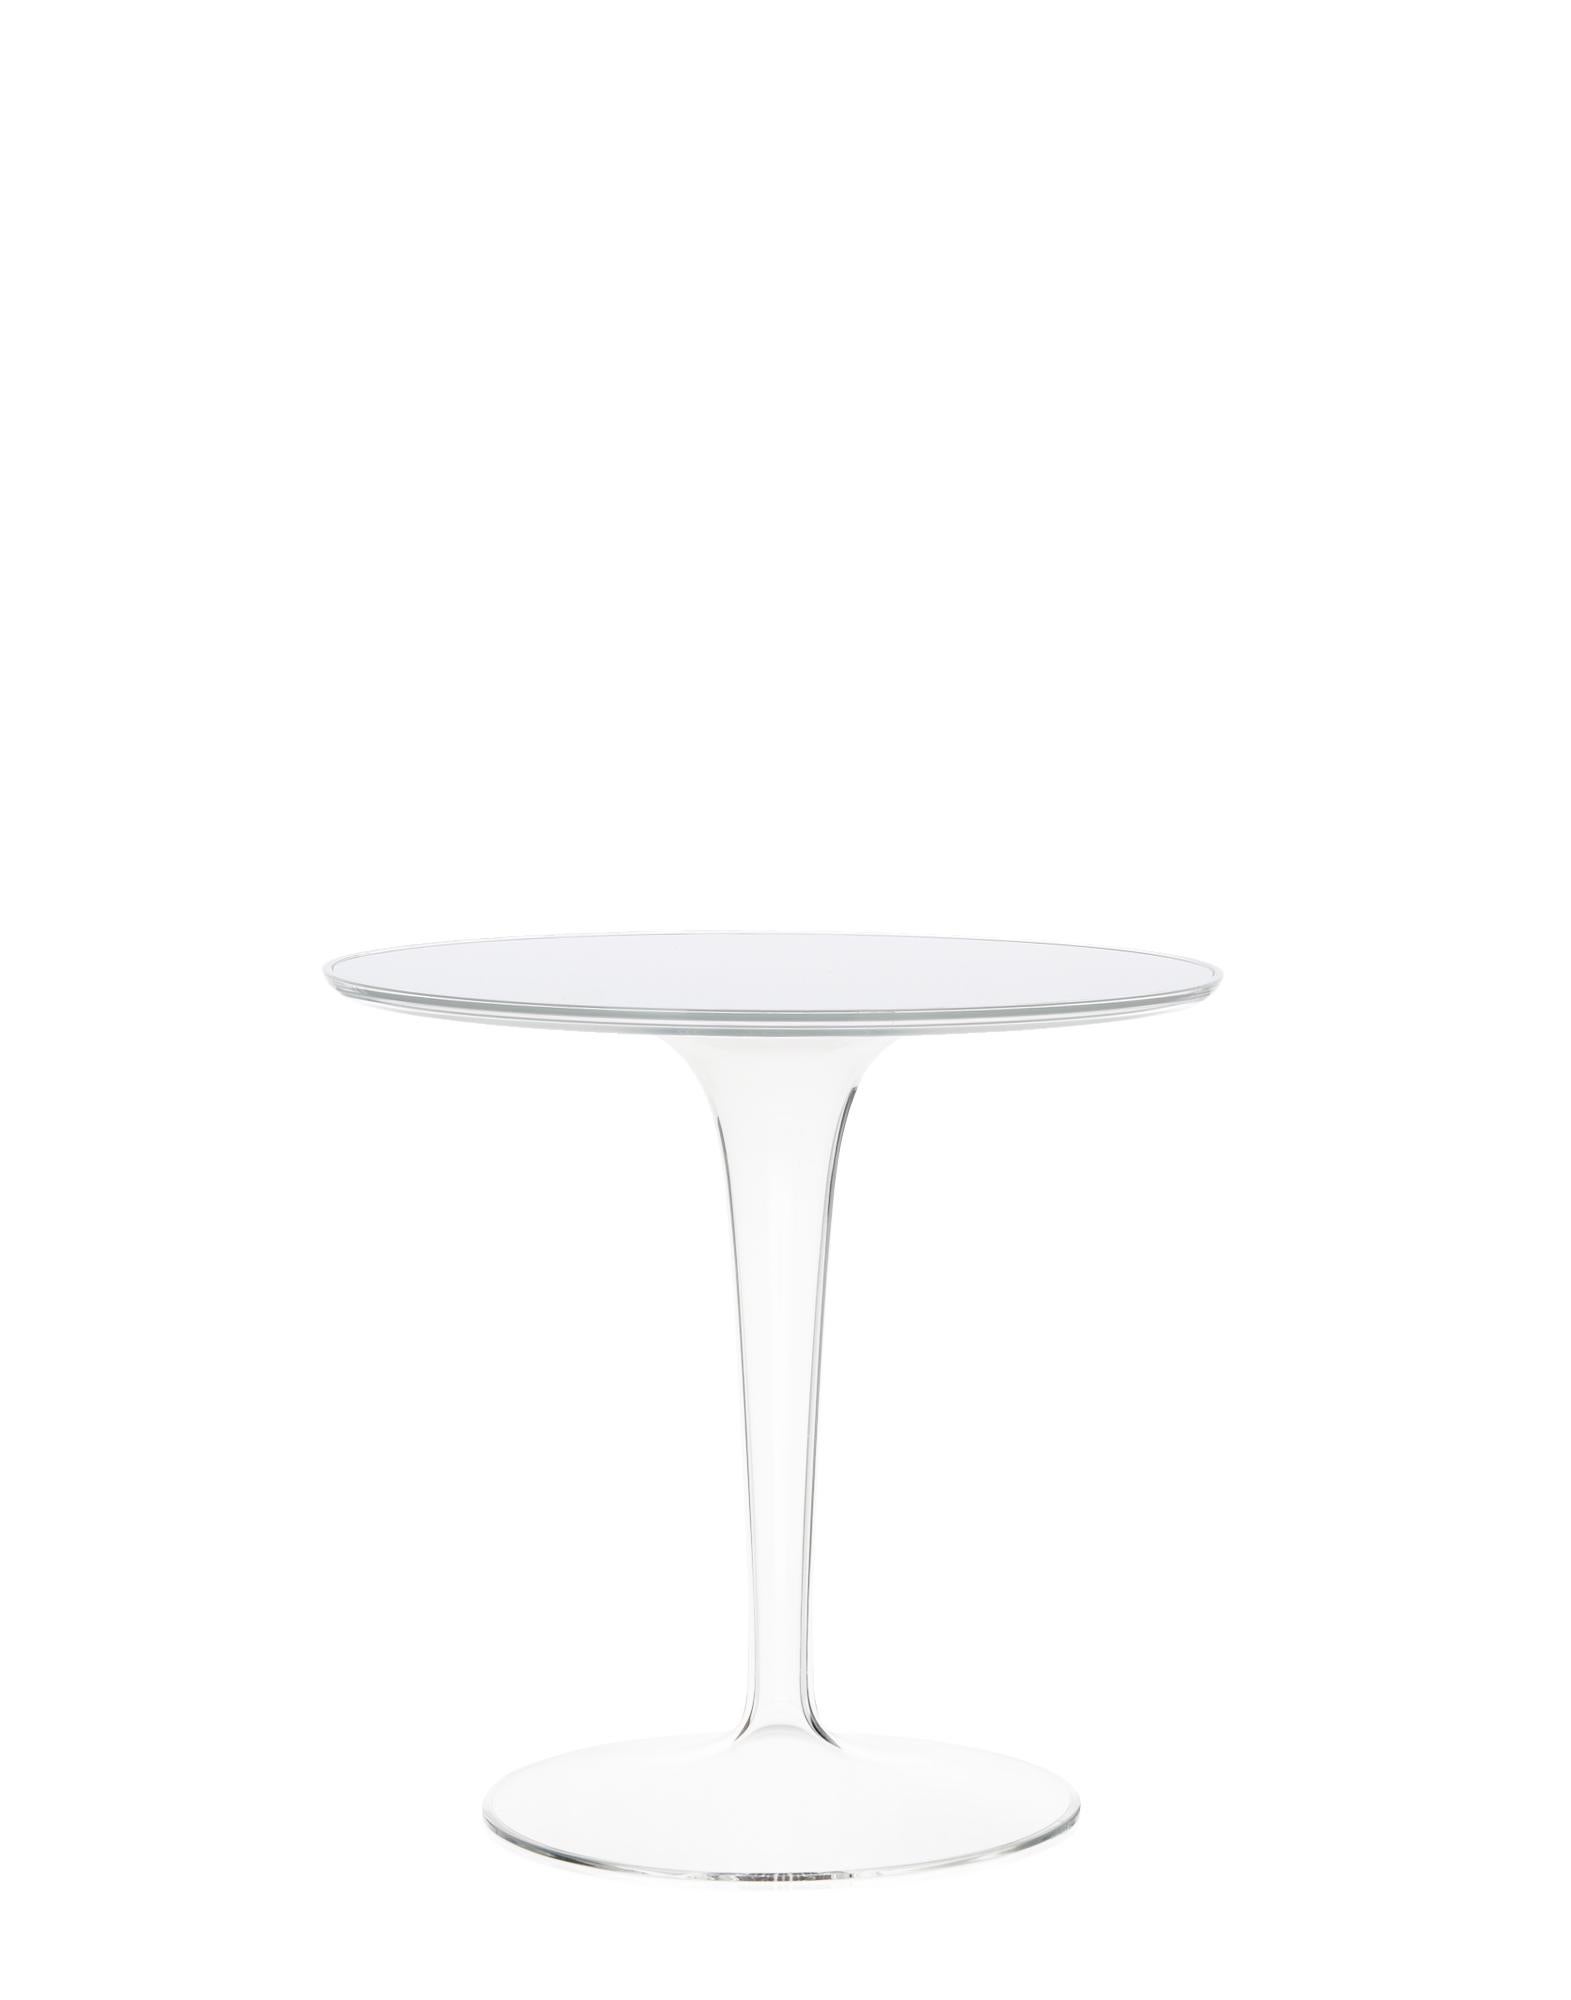 The mono-color Tip Top side-table dresses up in white for a bright and impactful look. The solid colour Tip Top side table with a round top is the ideal place to put all sorts of items in easy reach. Flexible and light, it ¬ts into any corner of the